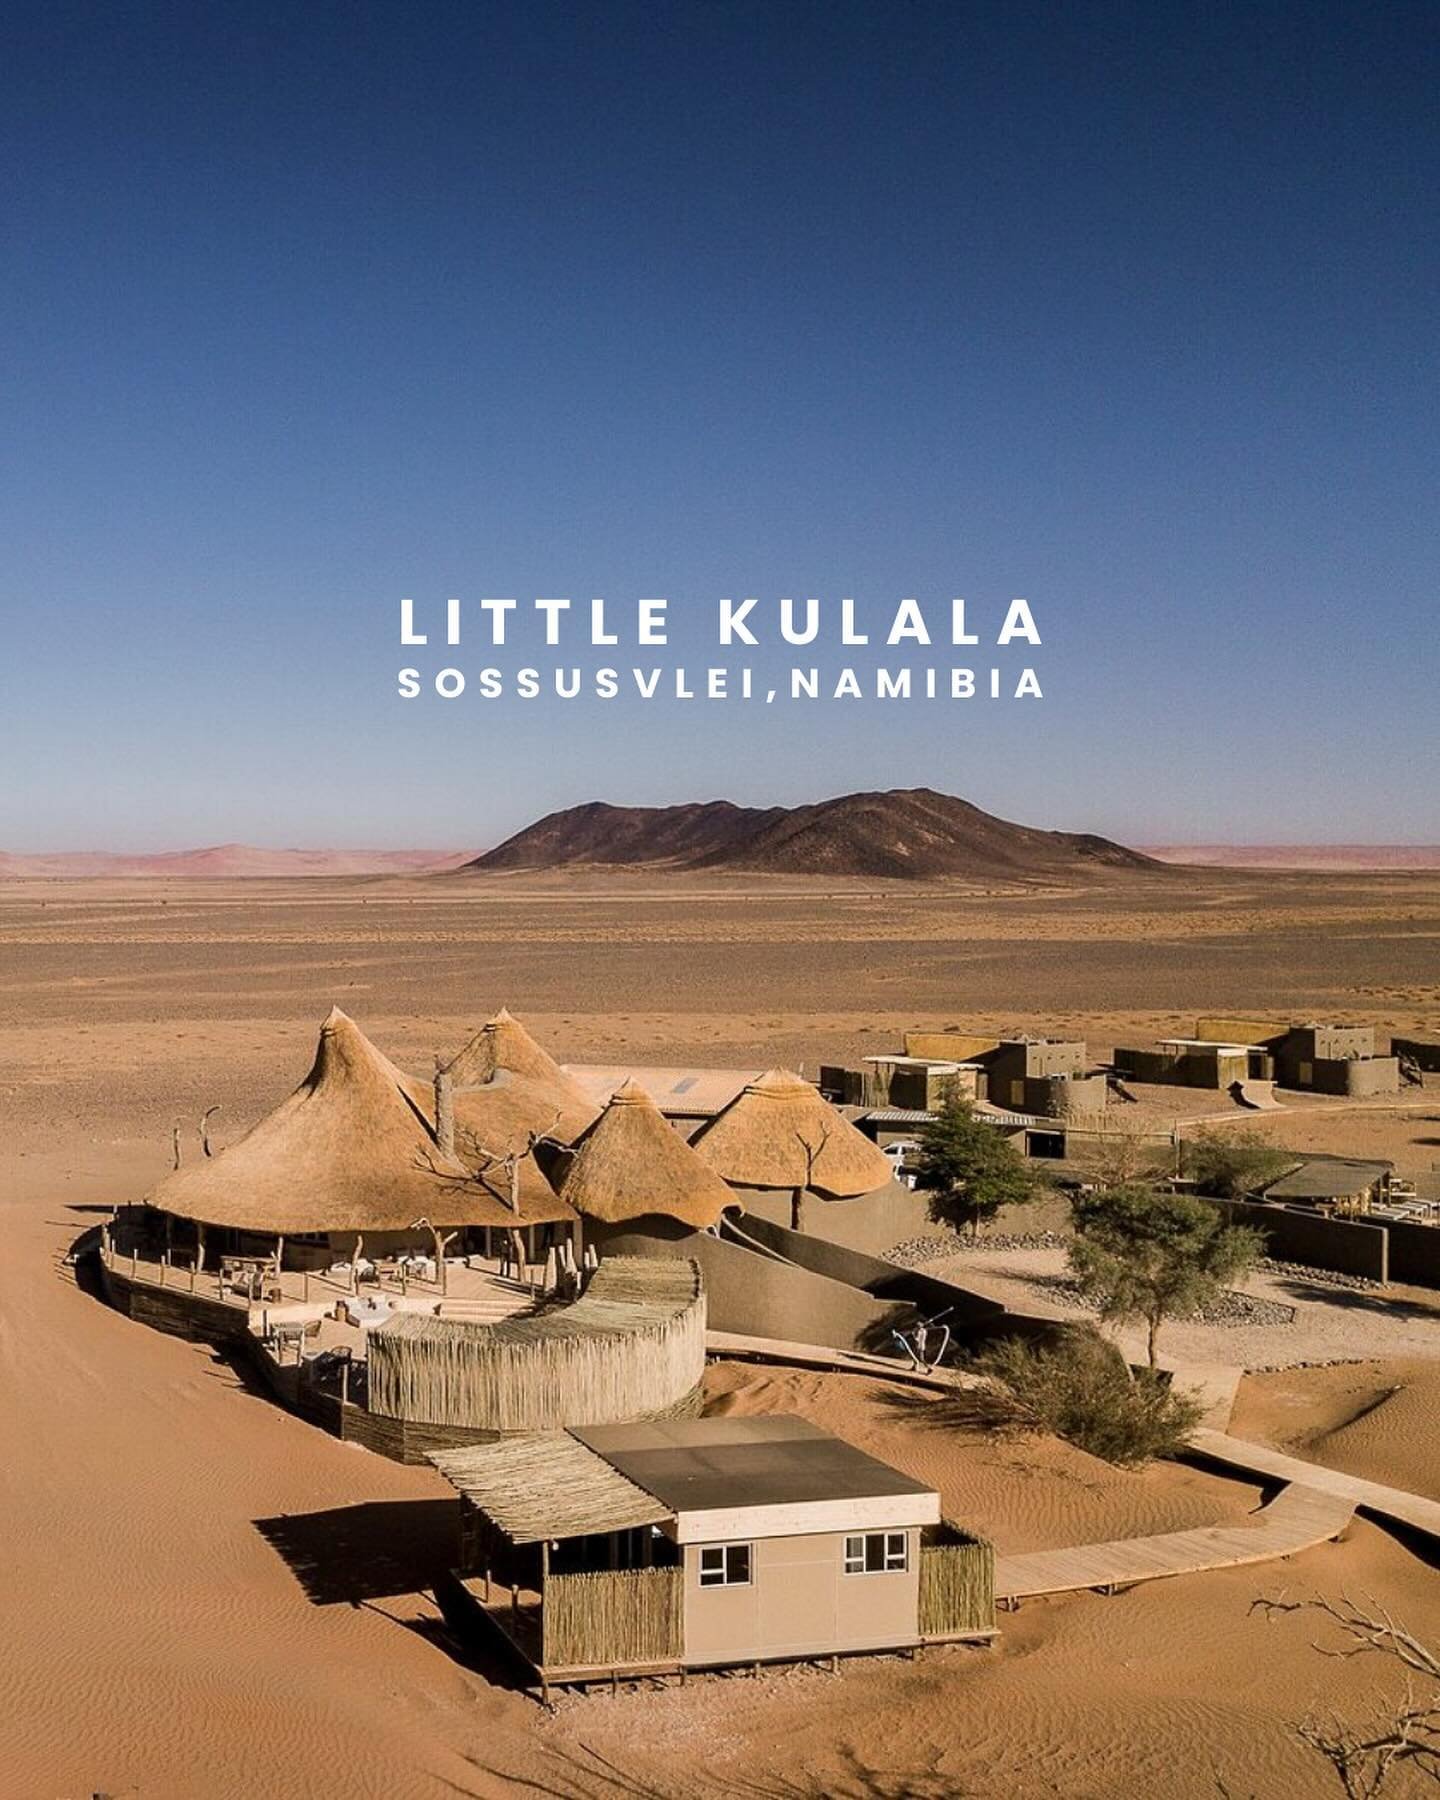 Escape to the mesmerizing beauty of Little Kulala, where luxury meets the wilderness in Namibia&rsquo;s Sossusvlei Desert. 🏜️ 

According to @wearewilderness, &ldquo;You can&rsquo;t get much closer to the renowned dunes of Sossusvlei and the evocati